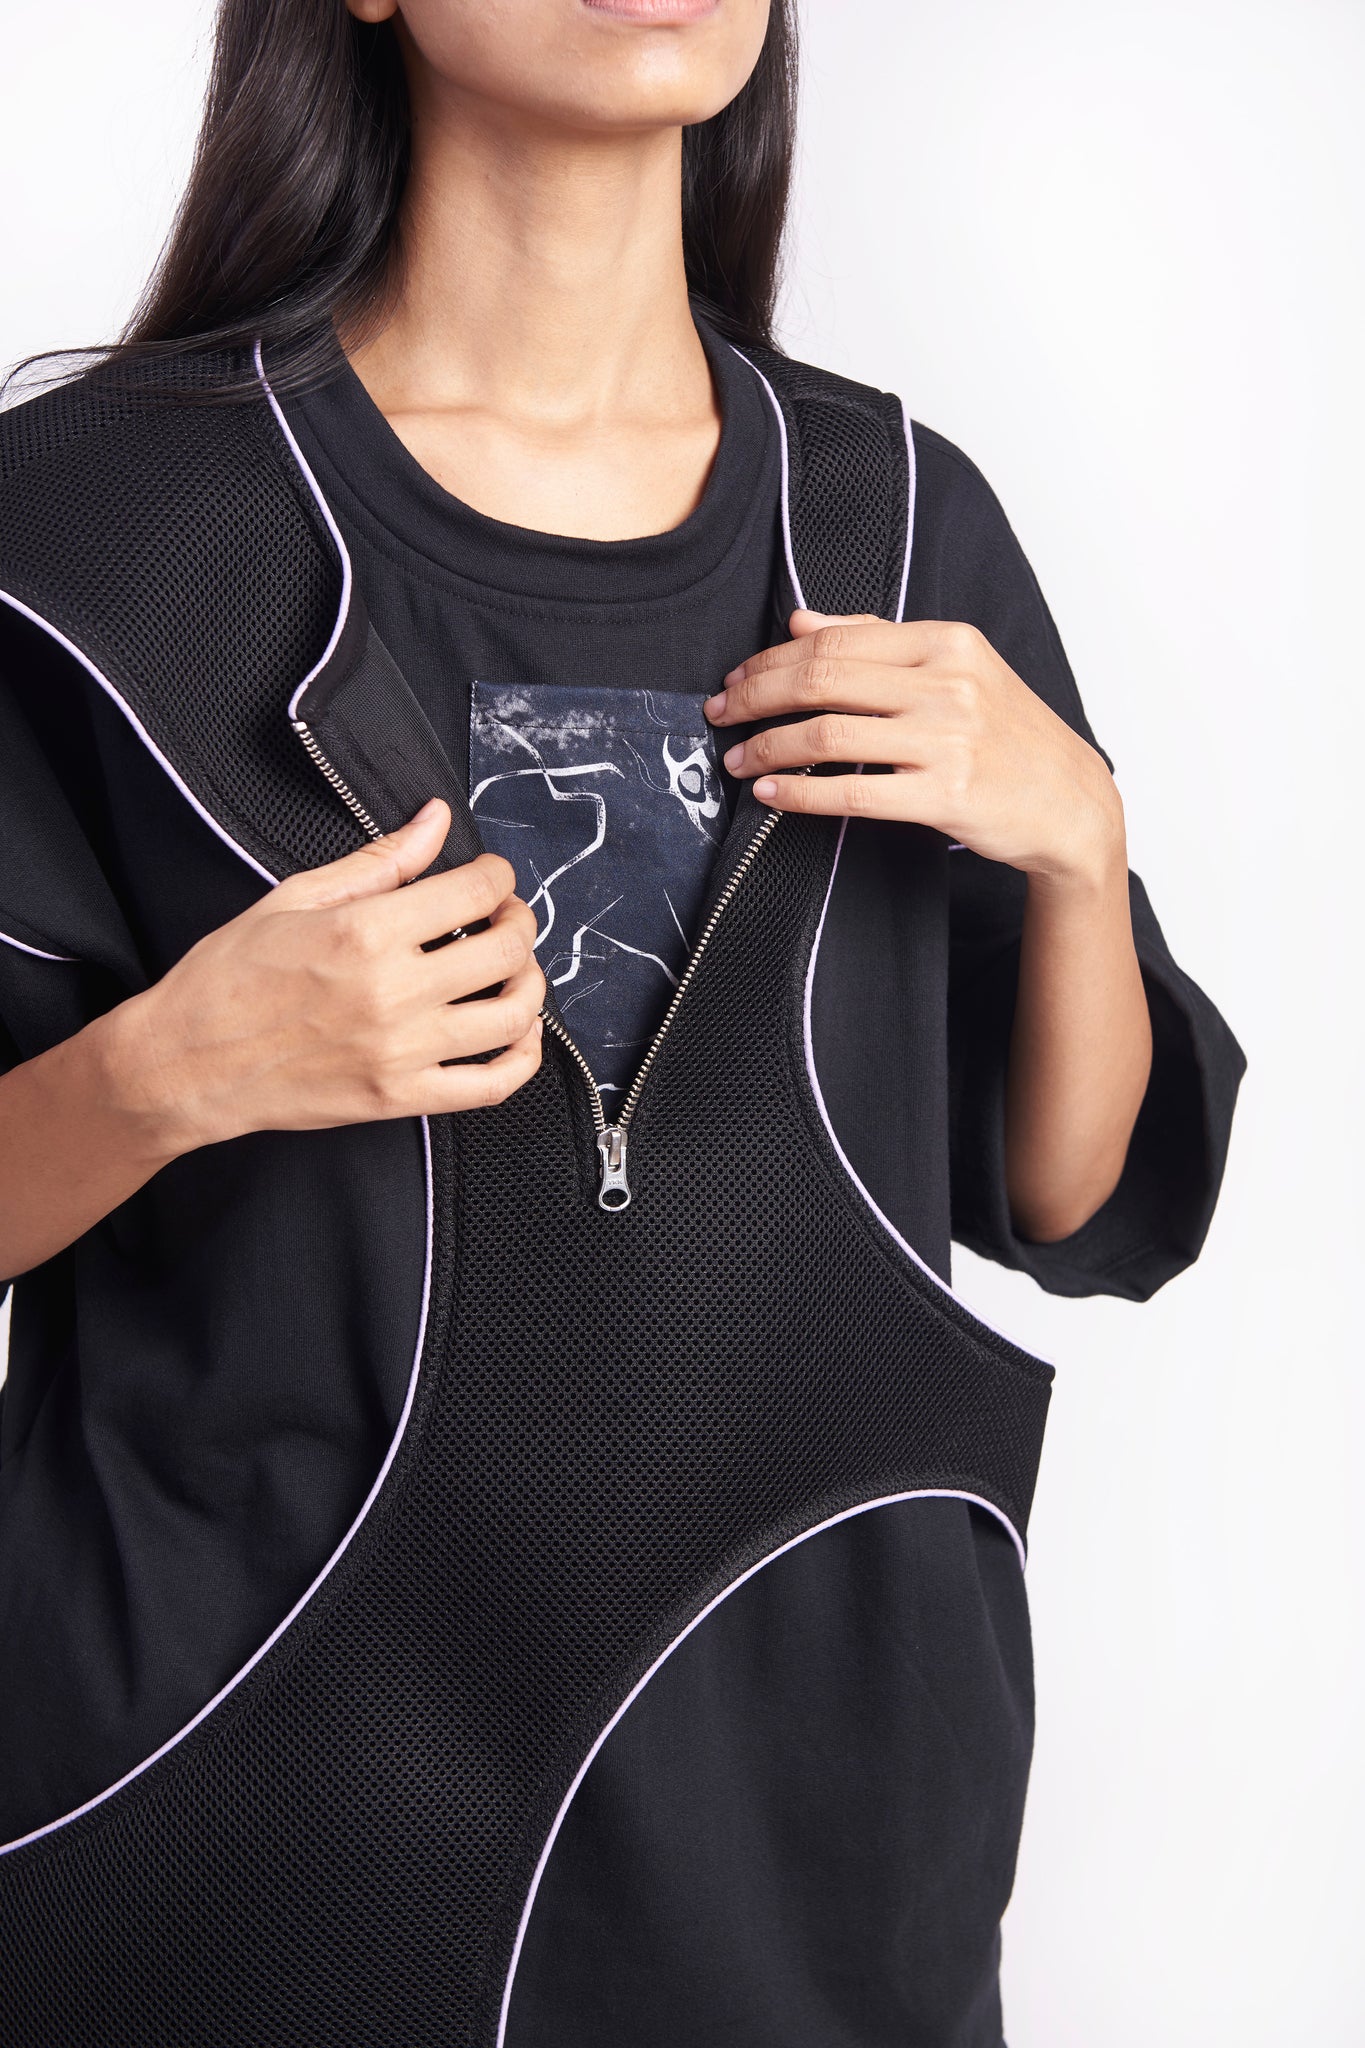 It also features a concealed ‘neuron’ print pocket under the mesh layer.